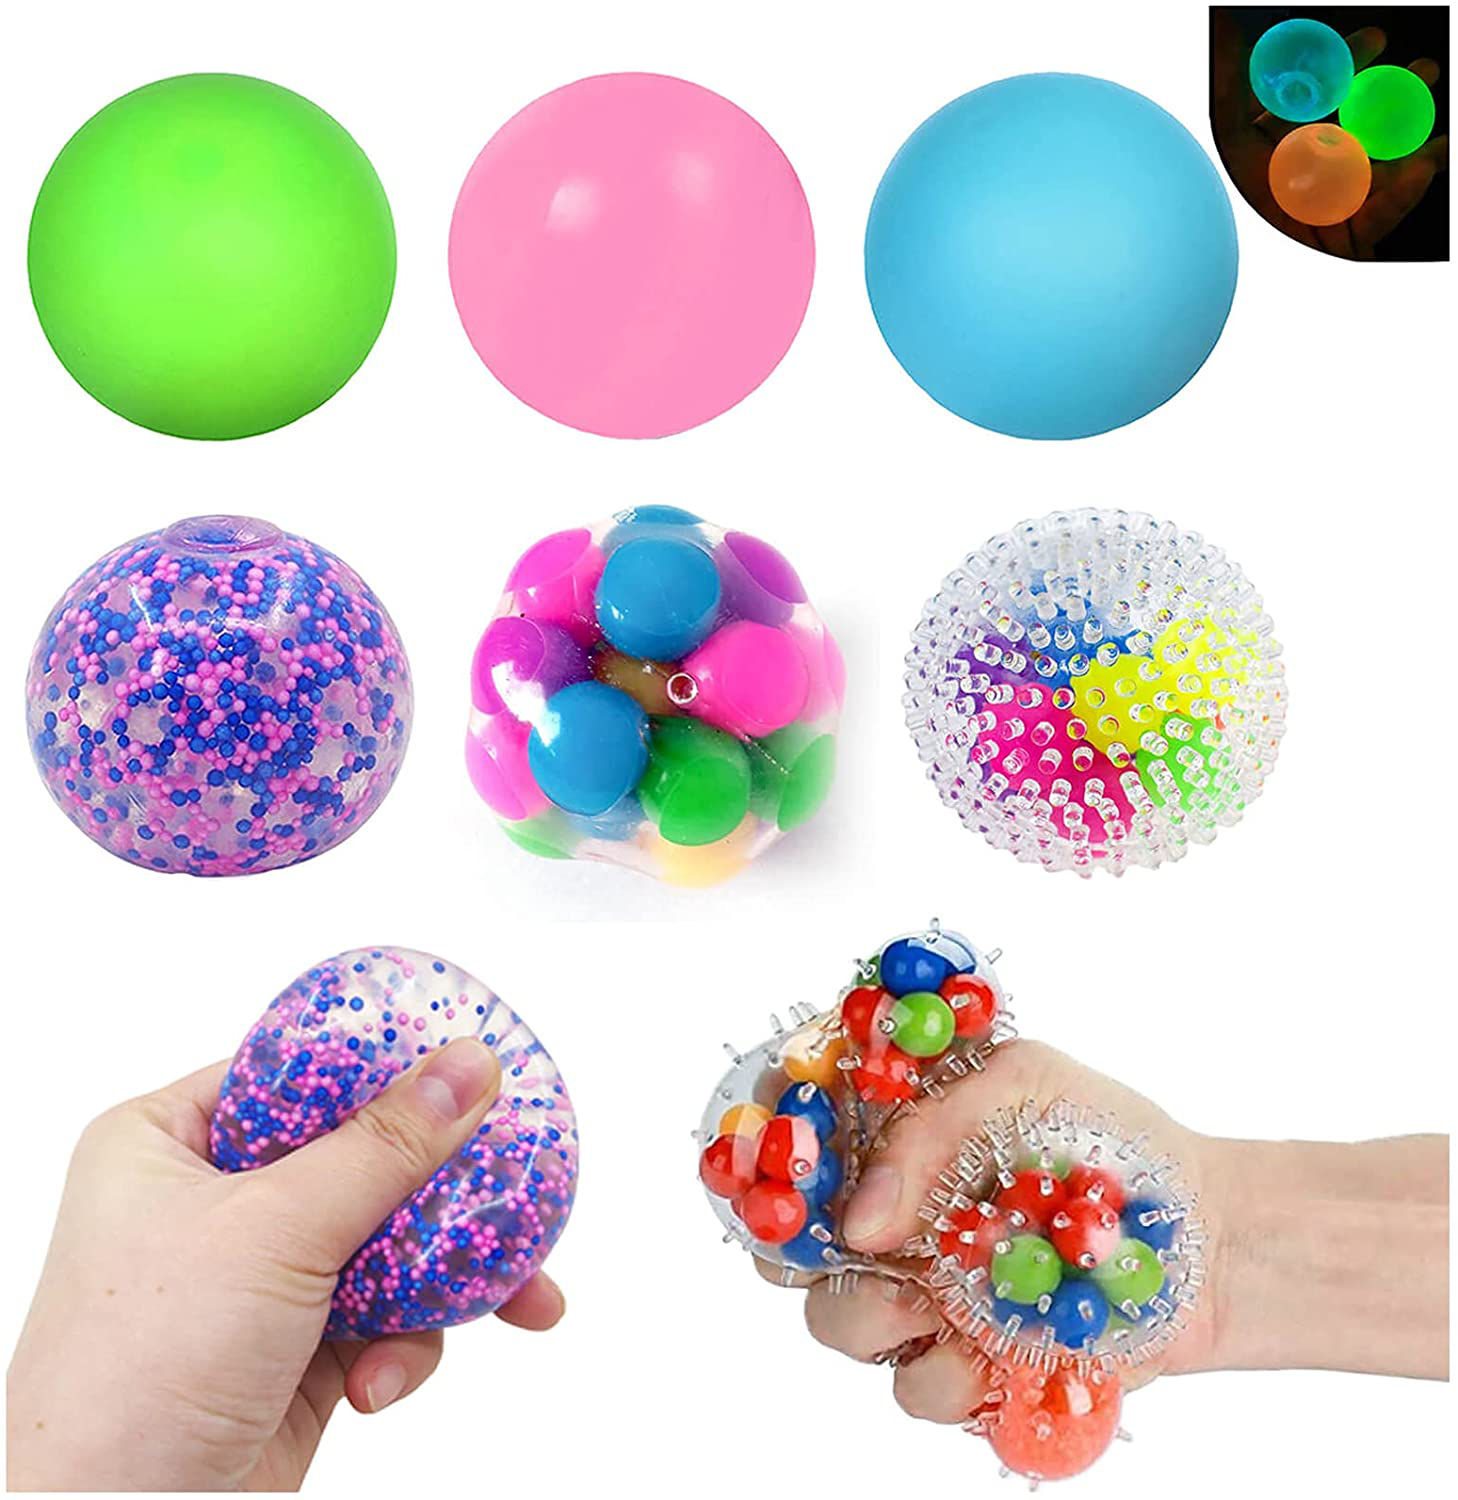 Squishy Sensory Stress Reliever Ball Toy Autism Squeeze Anxiety Fidget 